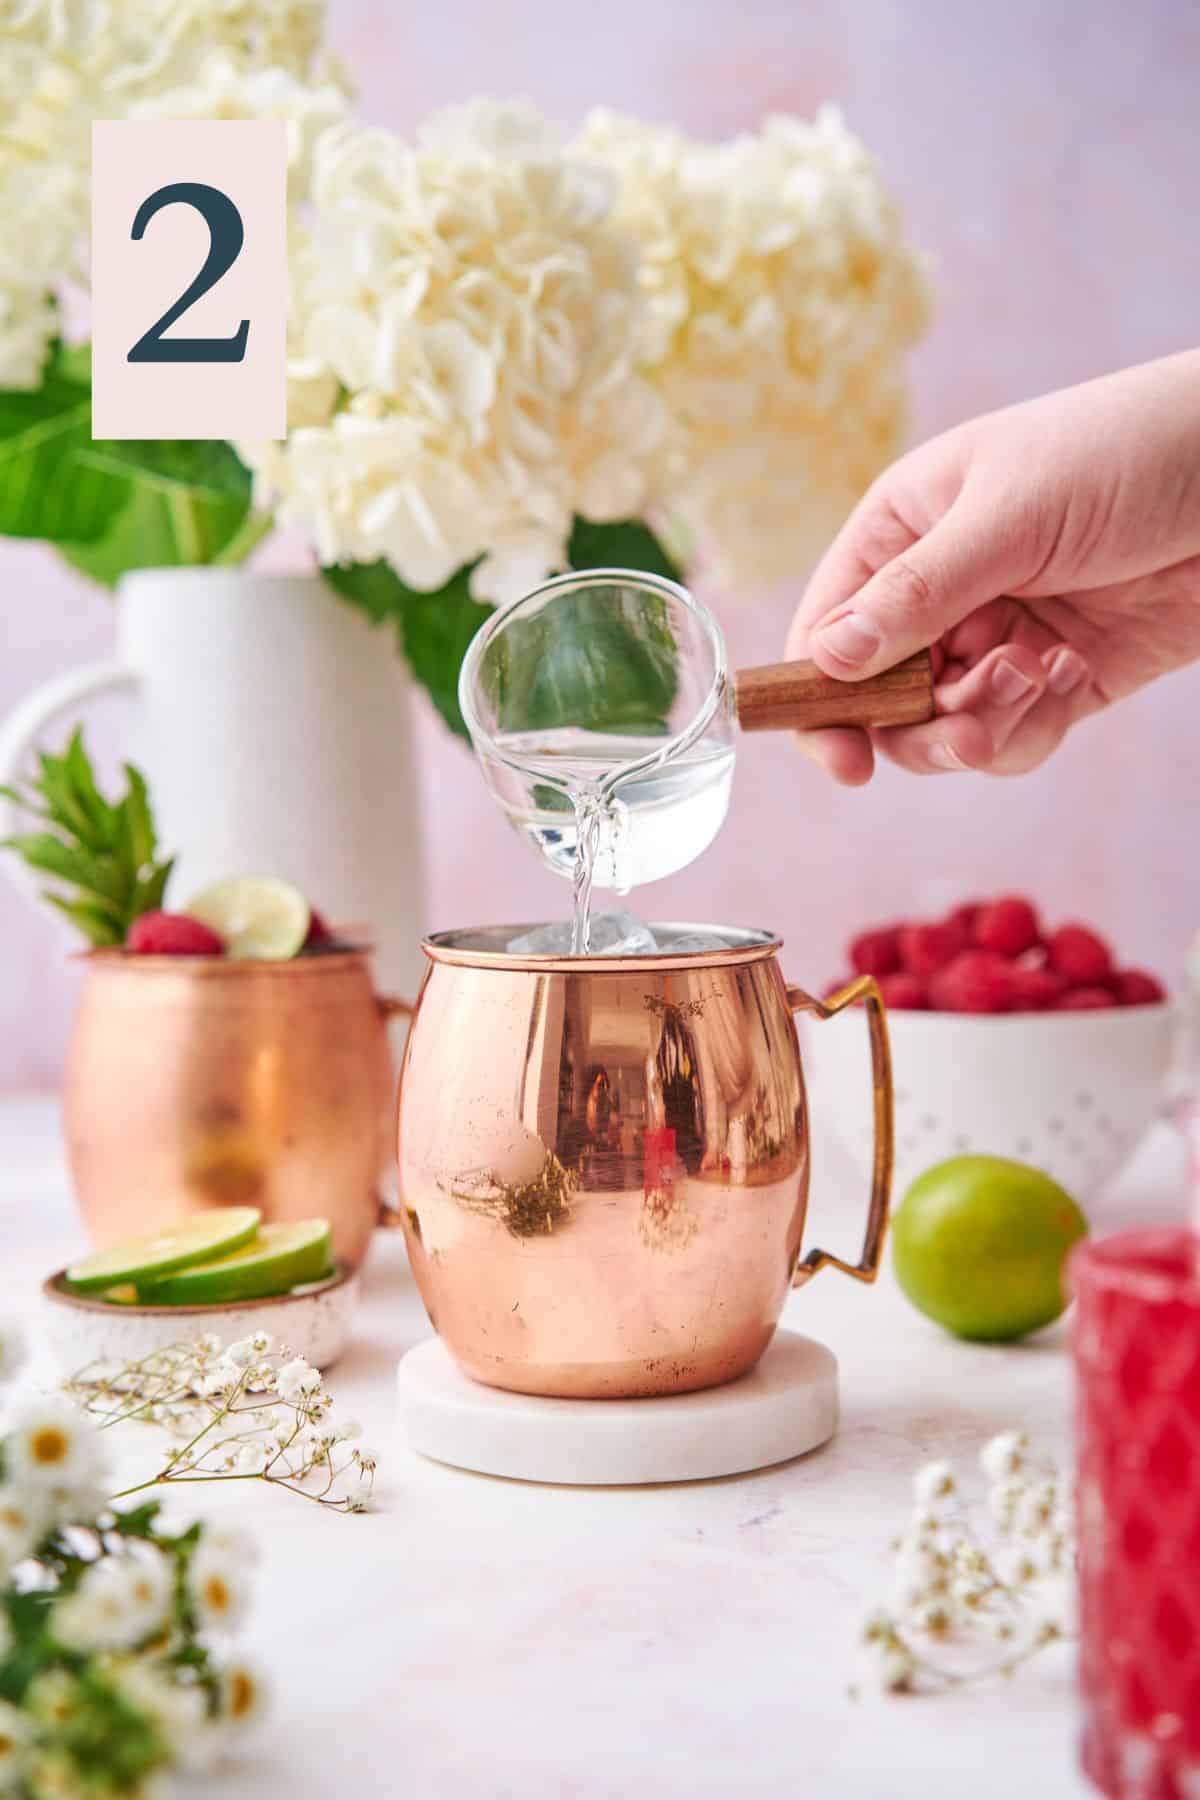 hand pouring vodka into a copper moscow mule mug with fresh raspberries, hydrangeas, and other small white flowers.  